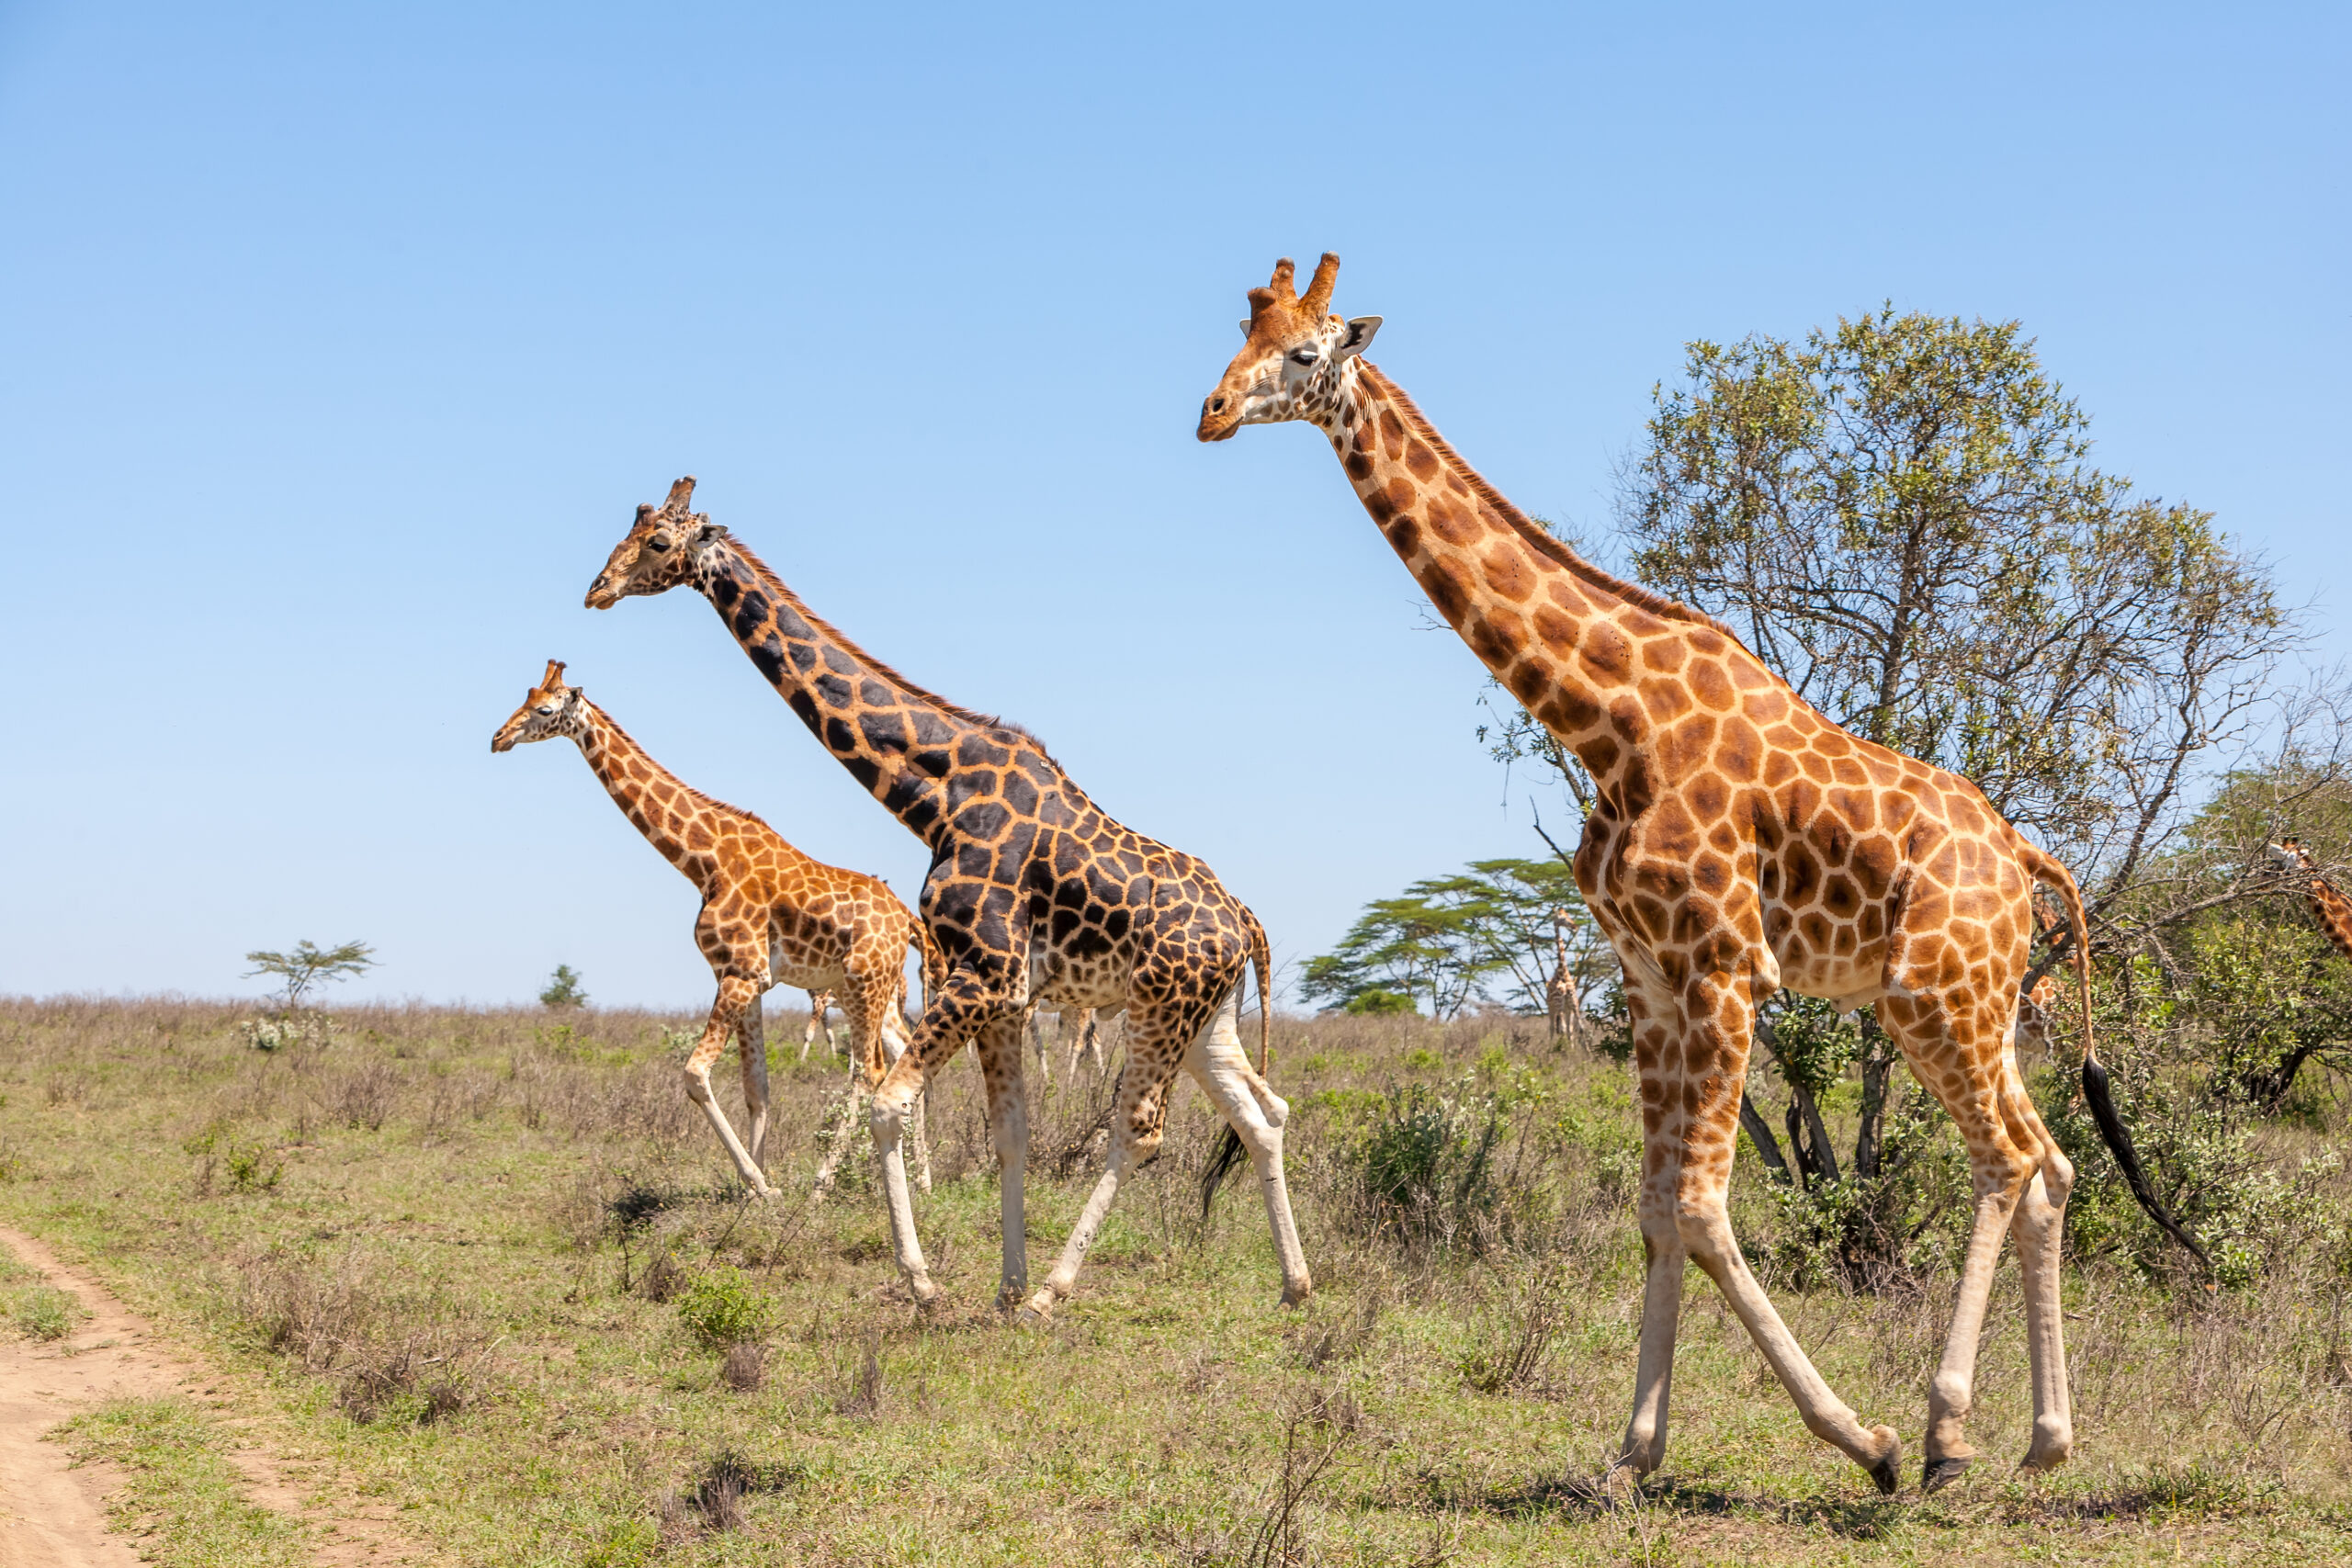 Fun Facts About Giraffes, Serengeti in December: Short Rain, Safari and Weather Tips, Serengeti in September, Serengeti in June: A Wildlife Paradise, A Complete Guide To African Safaris For Solo Travellers, Incredible Tanzania Safari, The 15 Largest Insects in the World (Biggest Bugs), 11 Alluring reasons to embark on a private safari, How To Plan a Serengeti Safari?, Luxury African Safari Destinations, 10 Reasons Why Feeding Wildlife Isn't Advisable, 6 Day Tanzania Closer To Nature, All-inclusive Safari